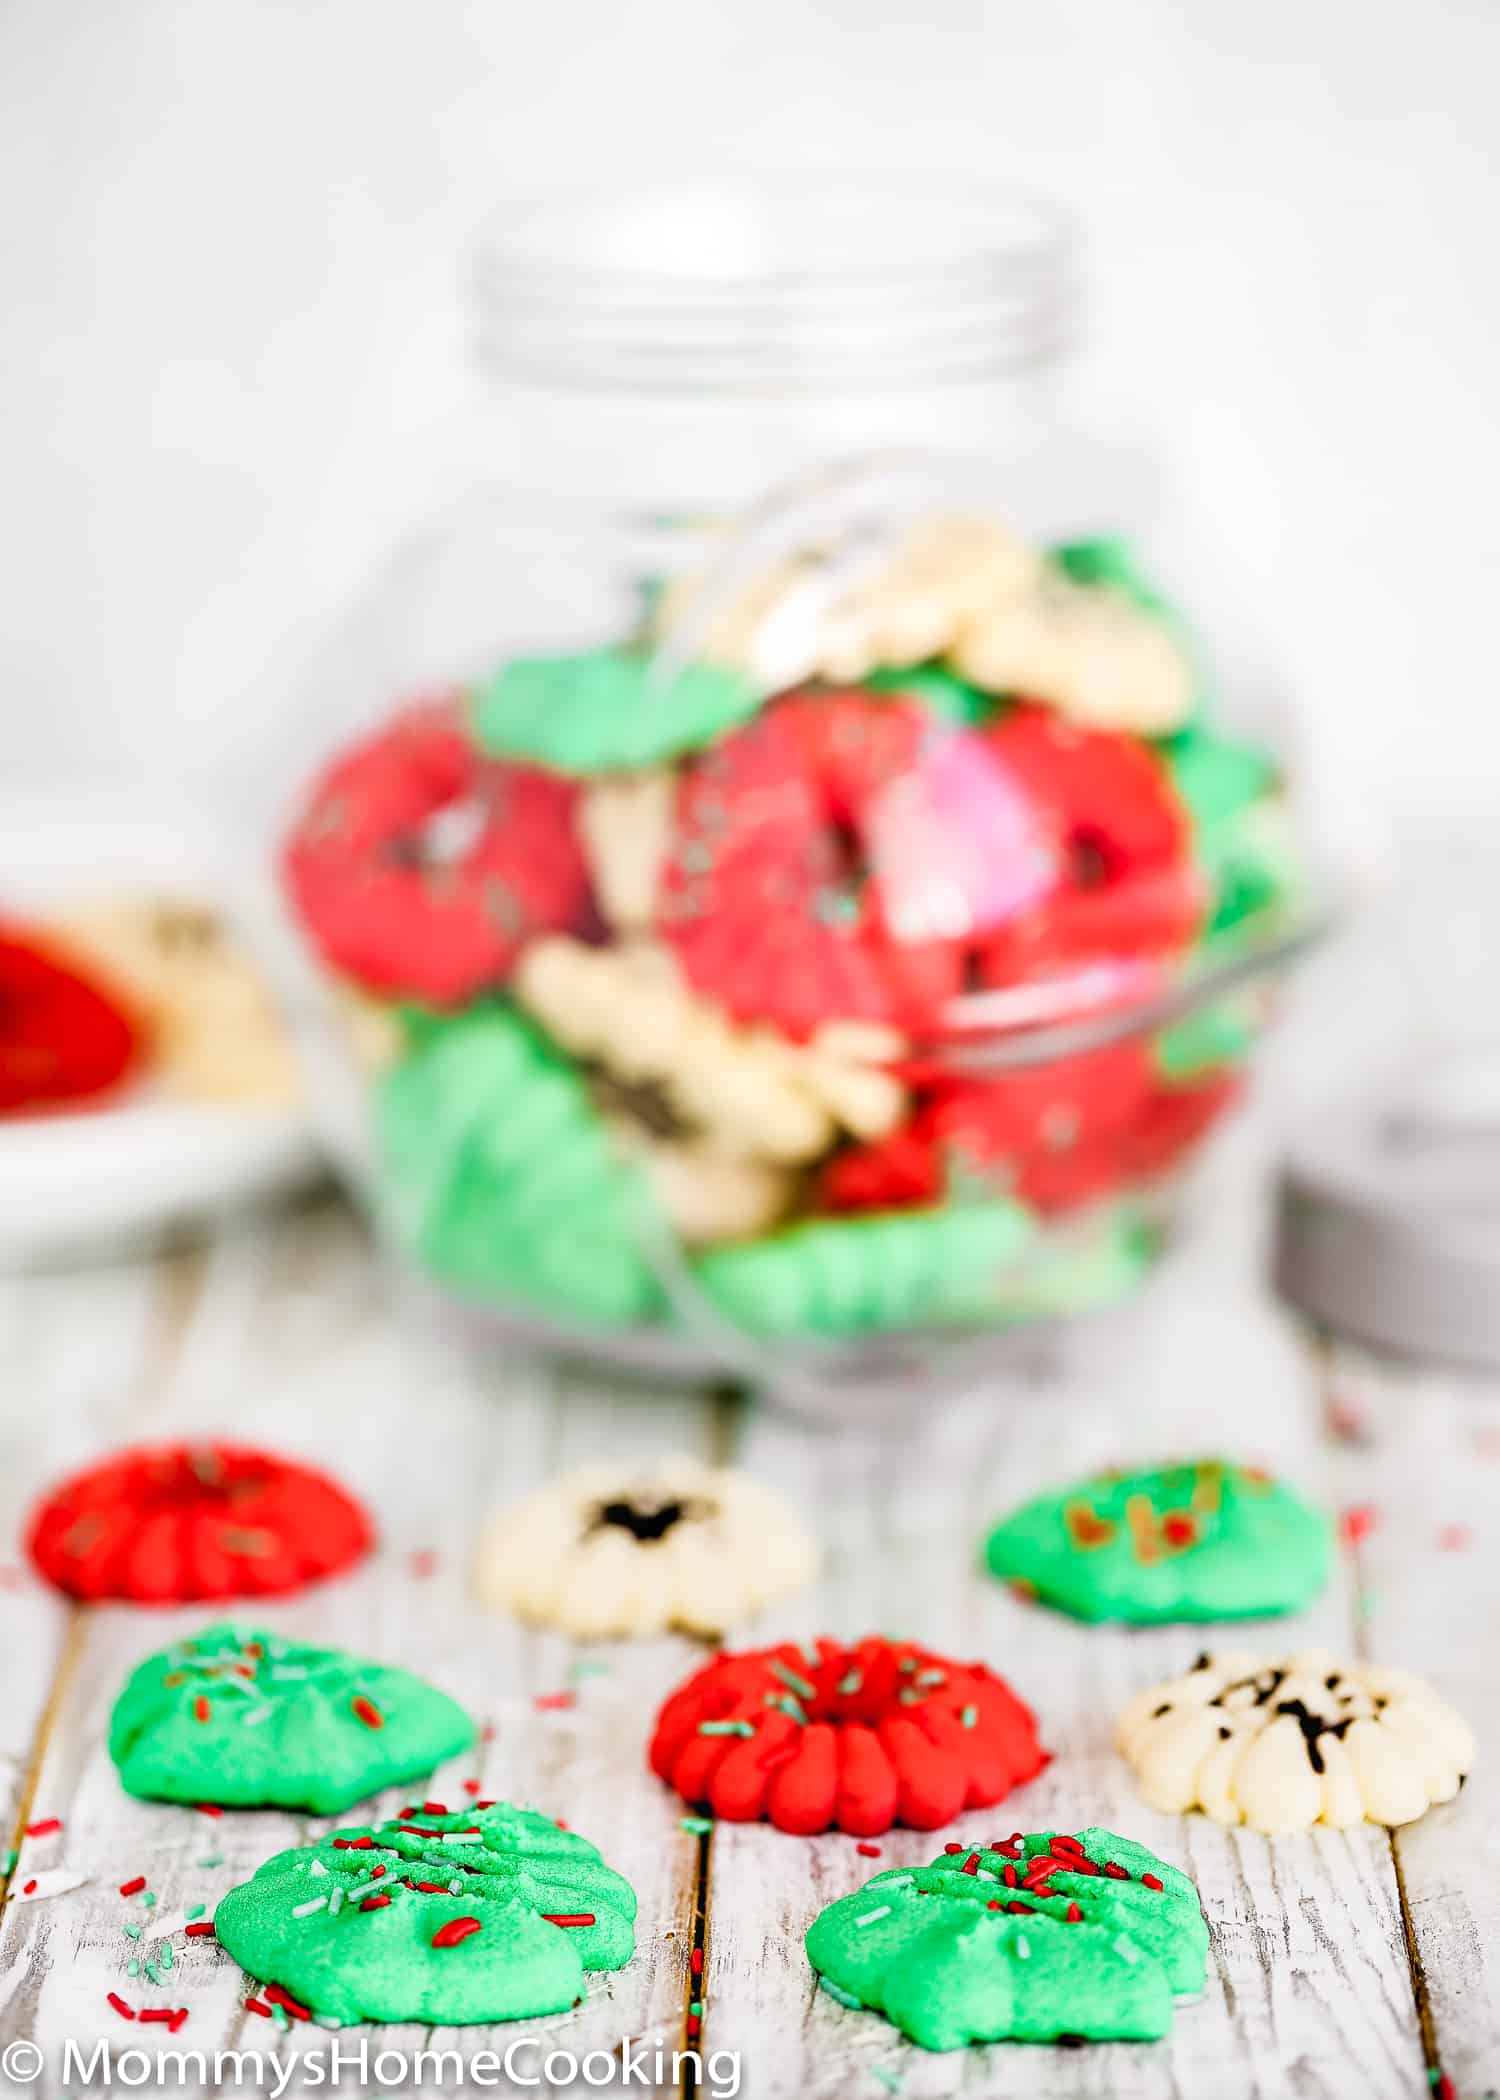 These Easy Eggless Spritz Cookies are tender, light, buttery and totally delicious. Easy and quick to make; no cookie dough chilling required. These egg-free cookies will make a great dessert contribution to any holiday party. https://mommyshomecooking.com